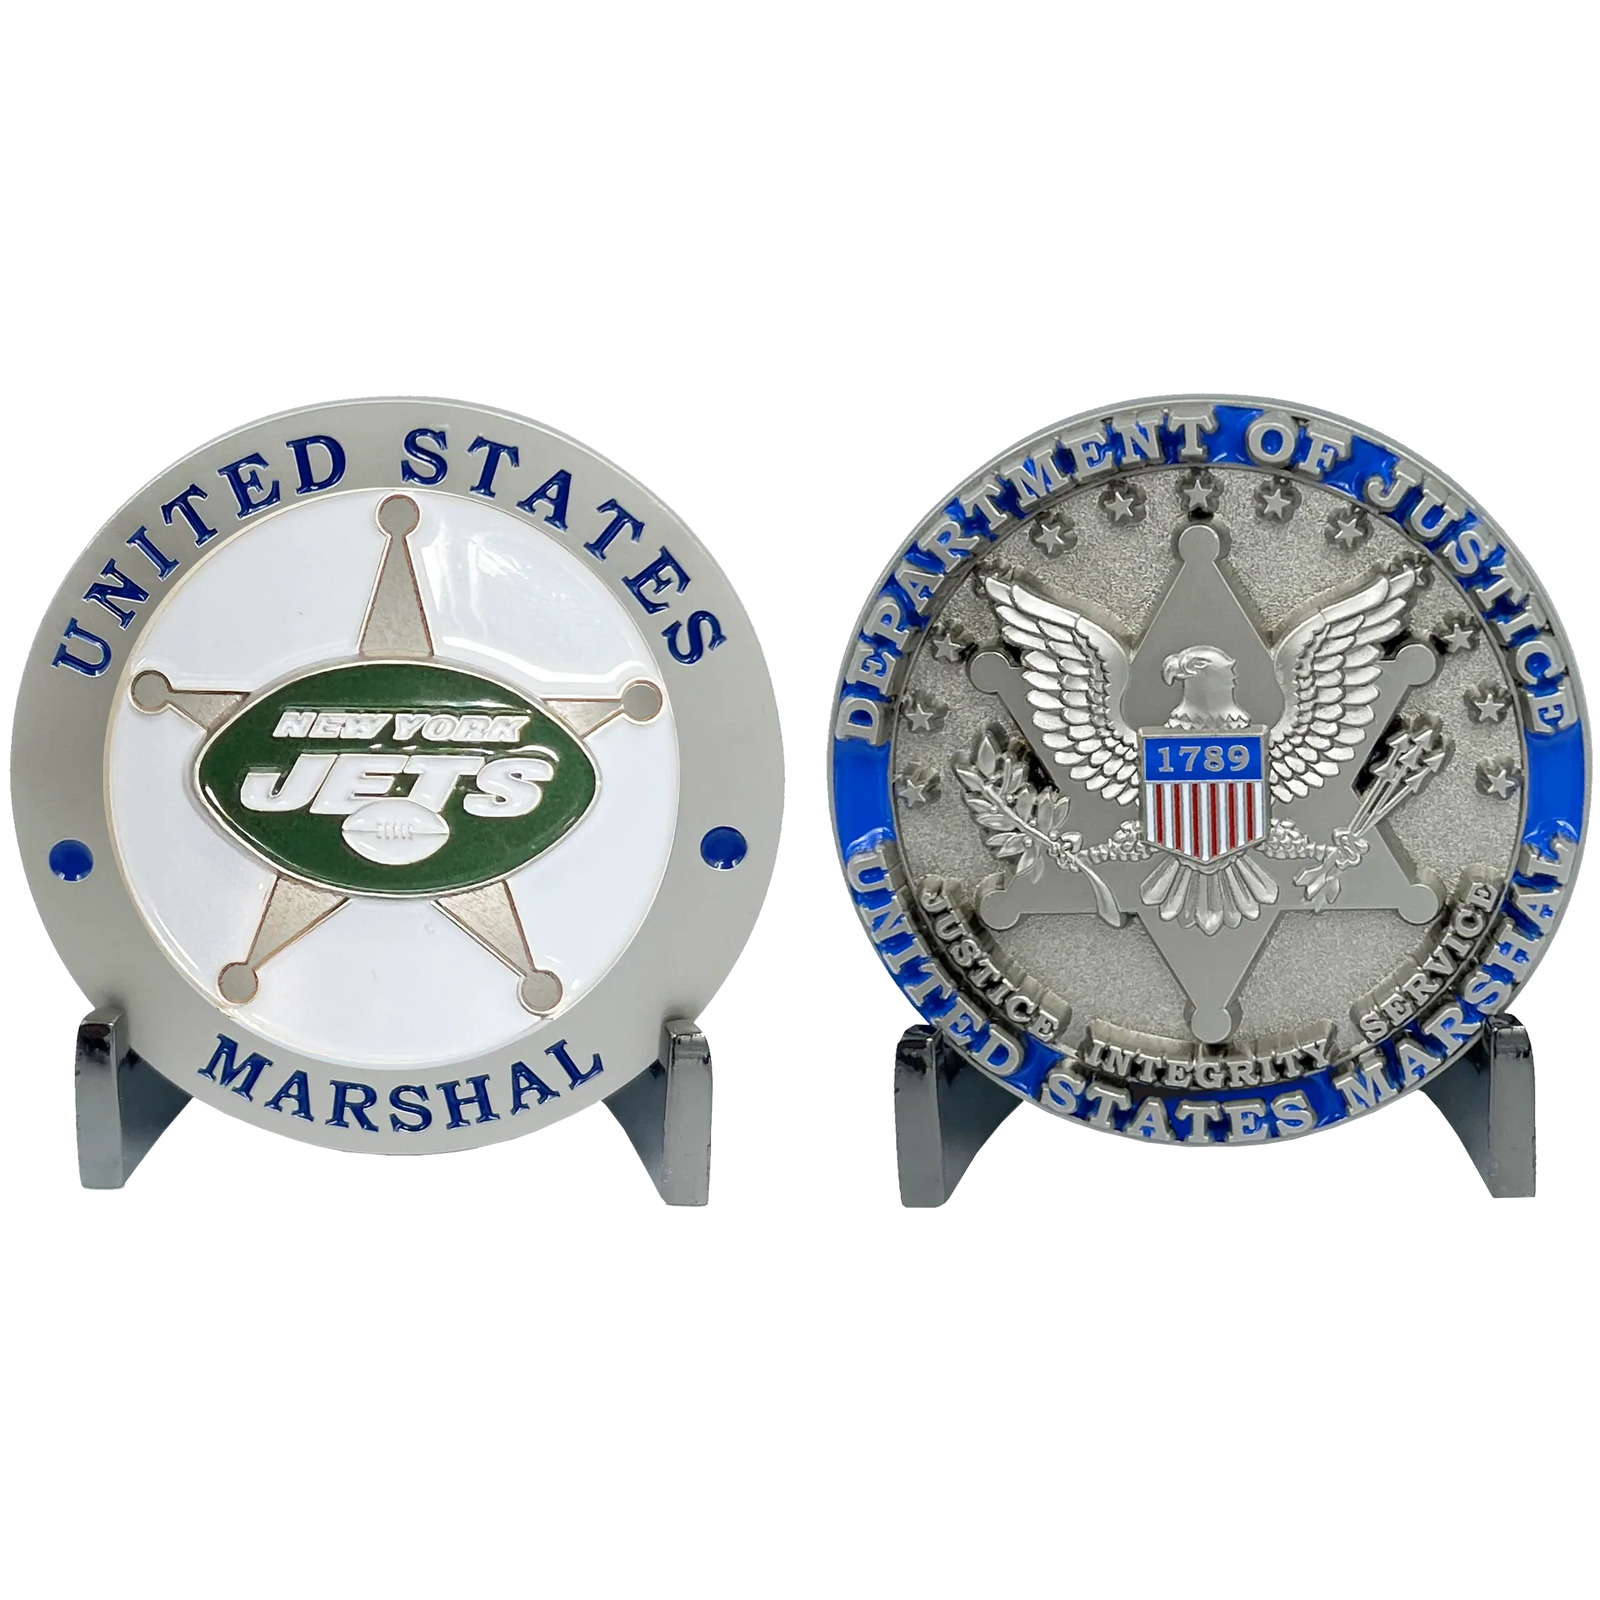 EL12-005 New York Football New Jersey United States NY US Marshal Challenge Coin